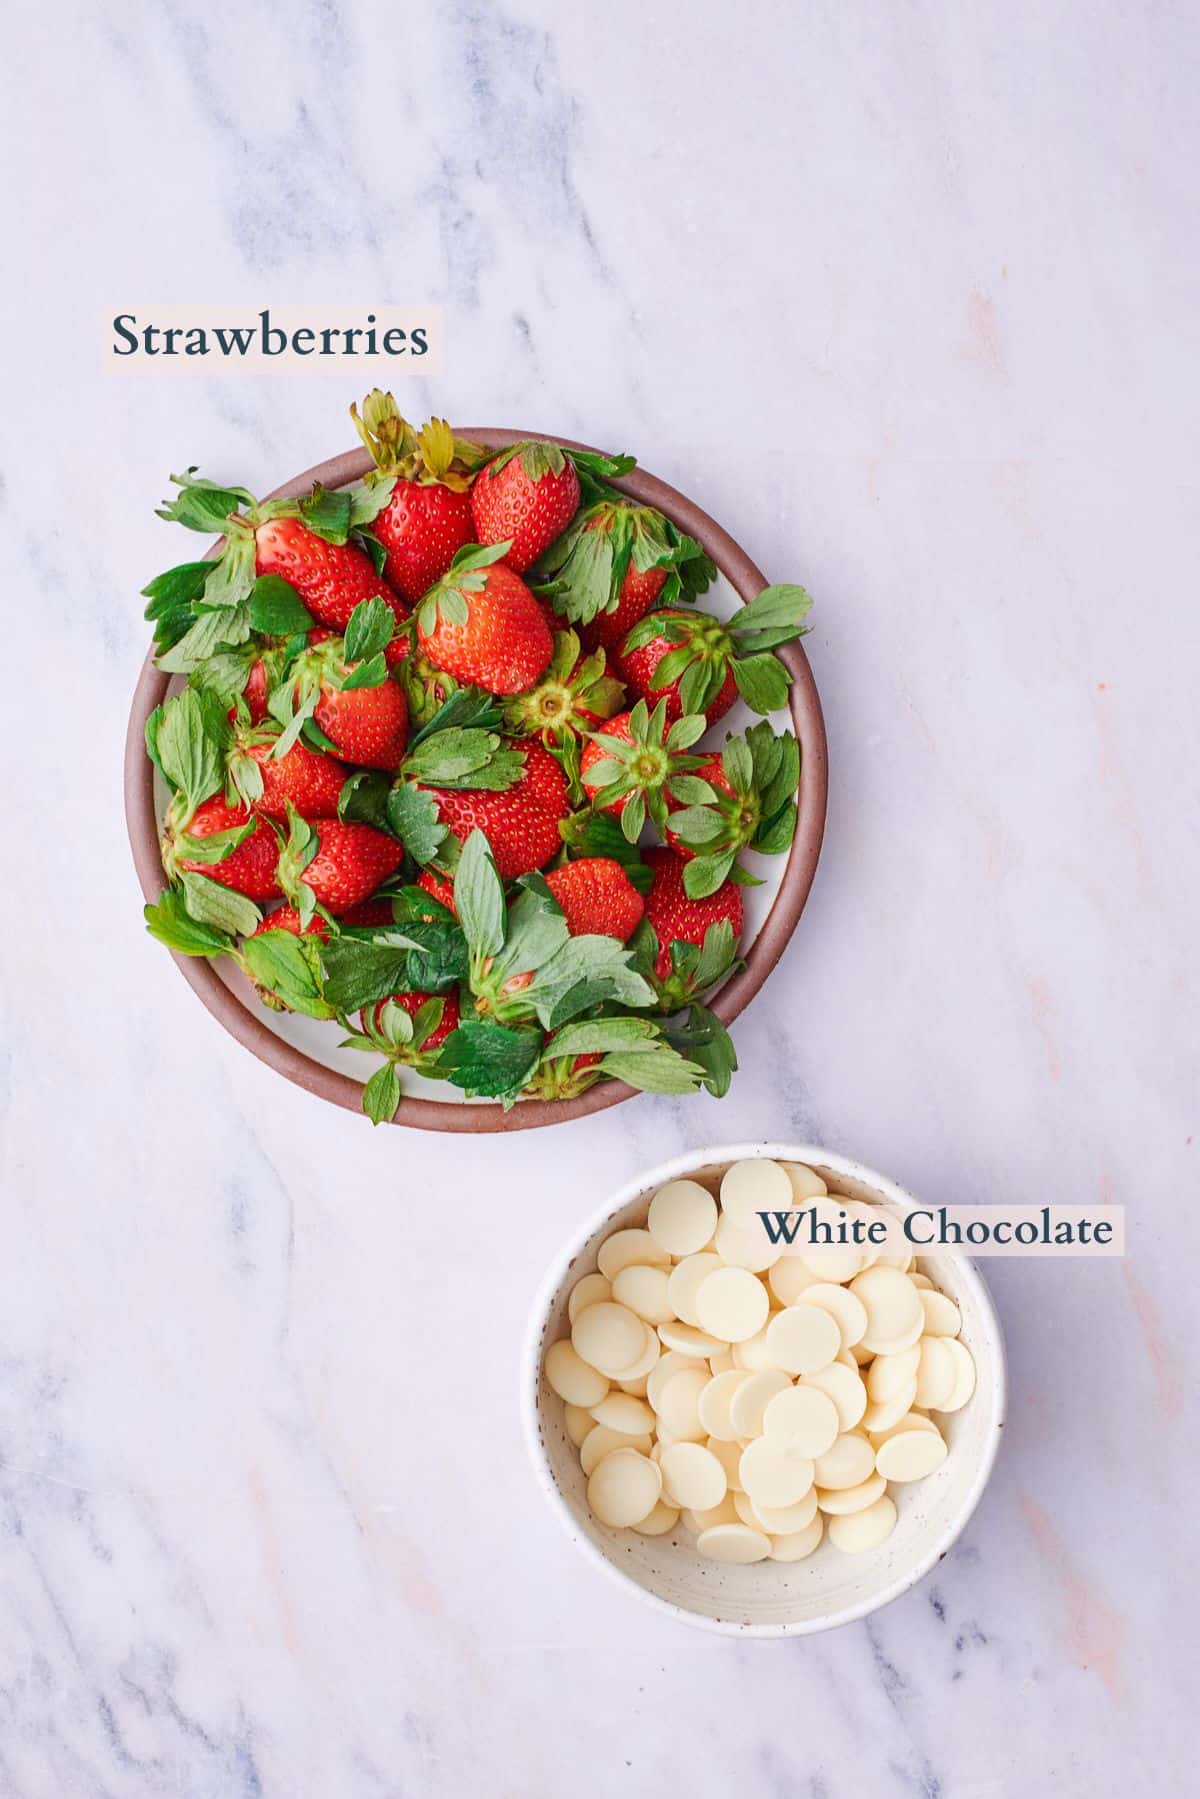 A pile of strawberries and white chocolate wafers.